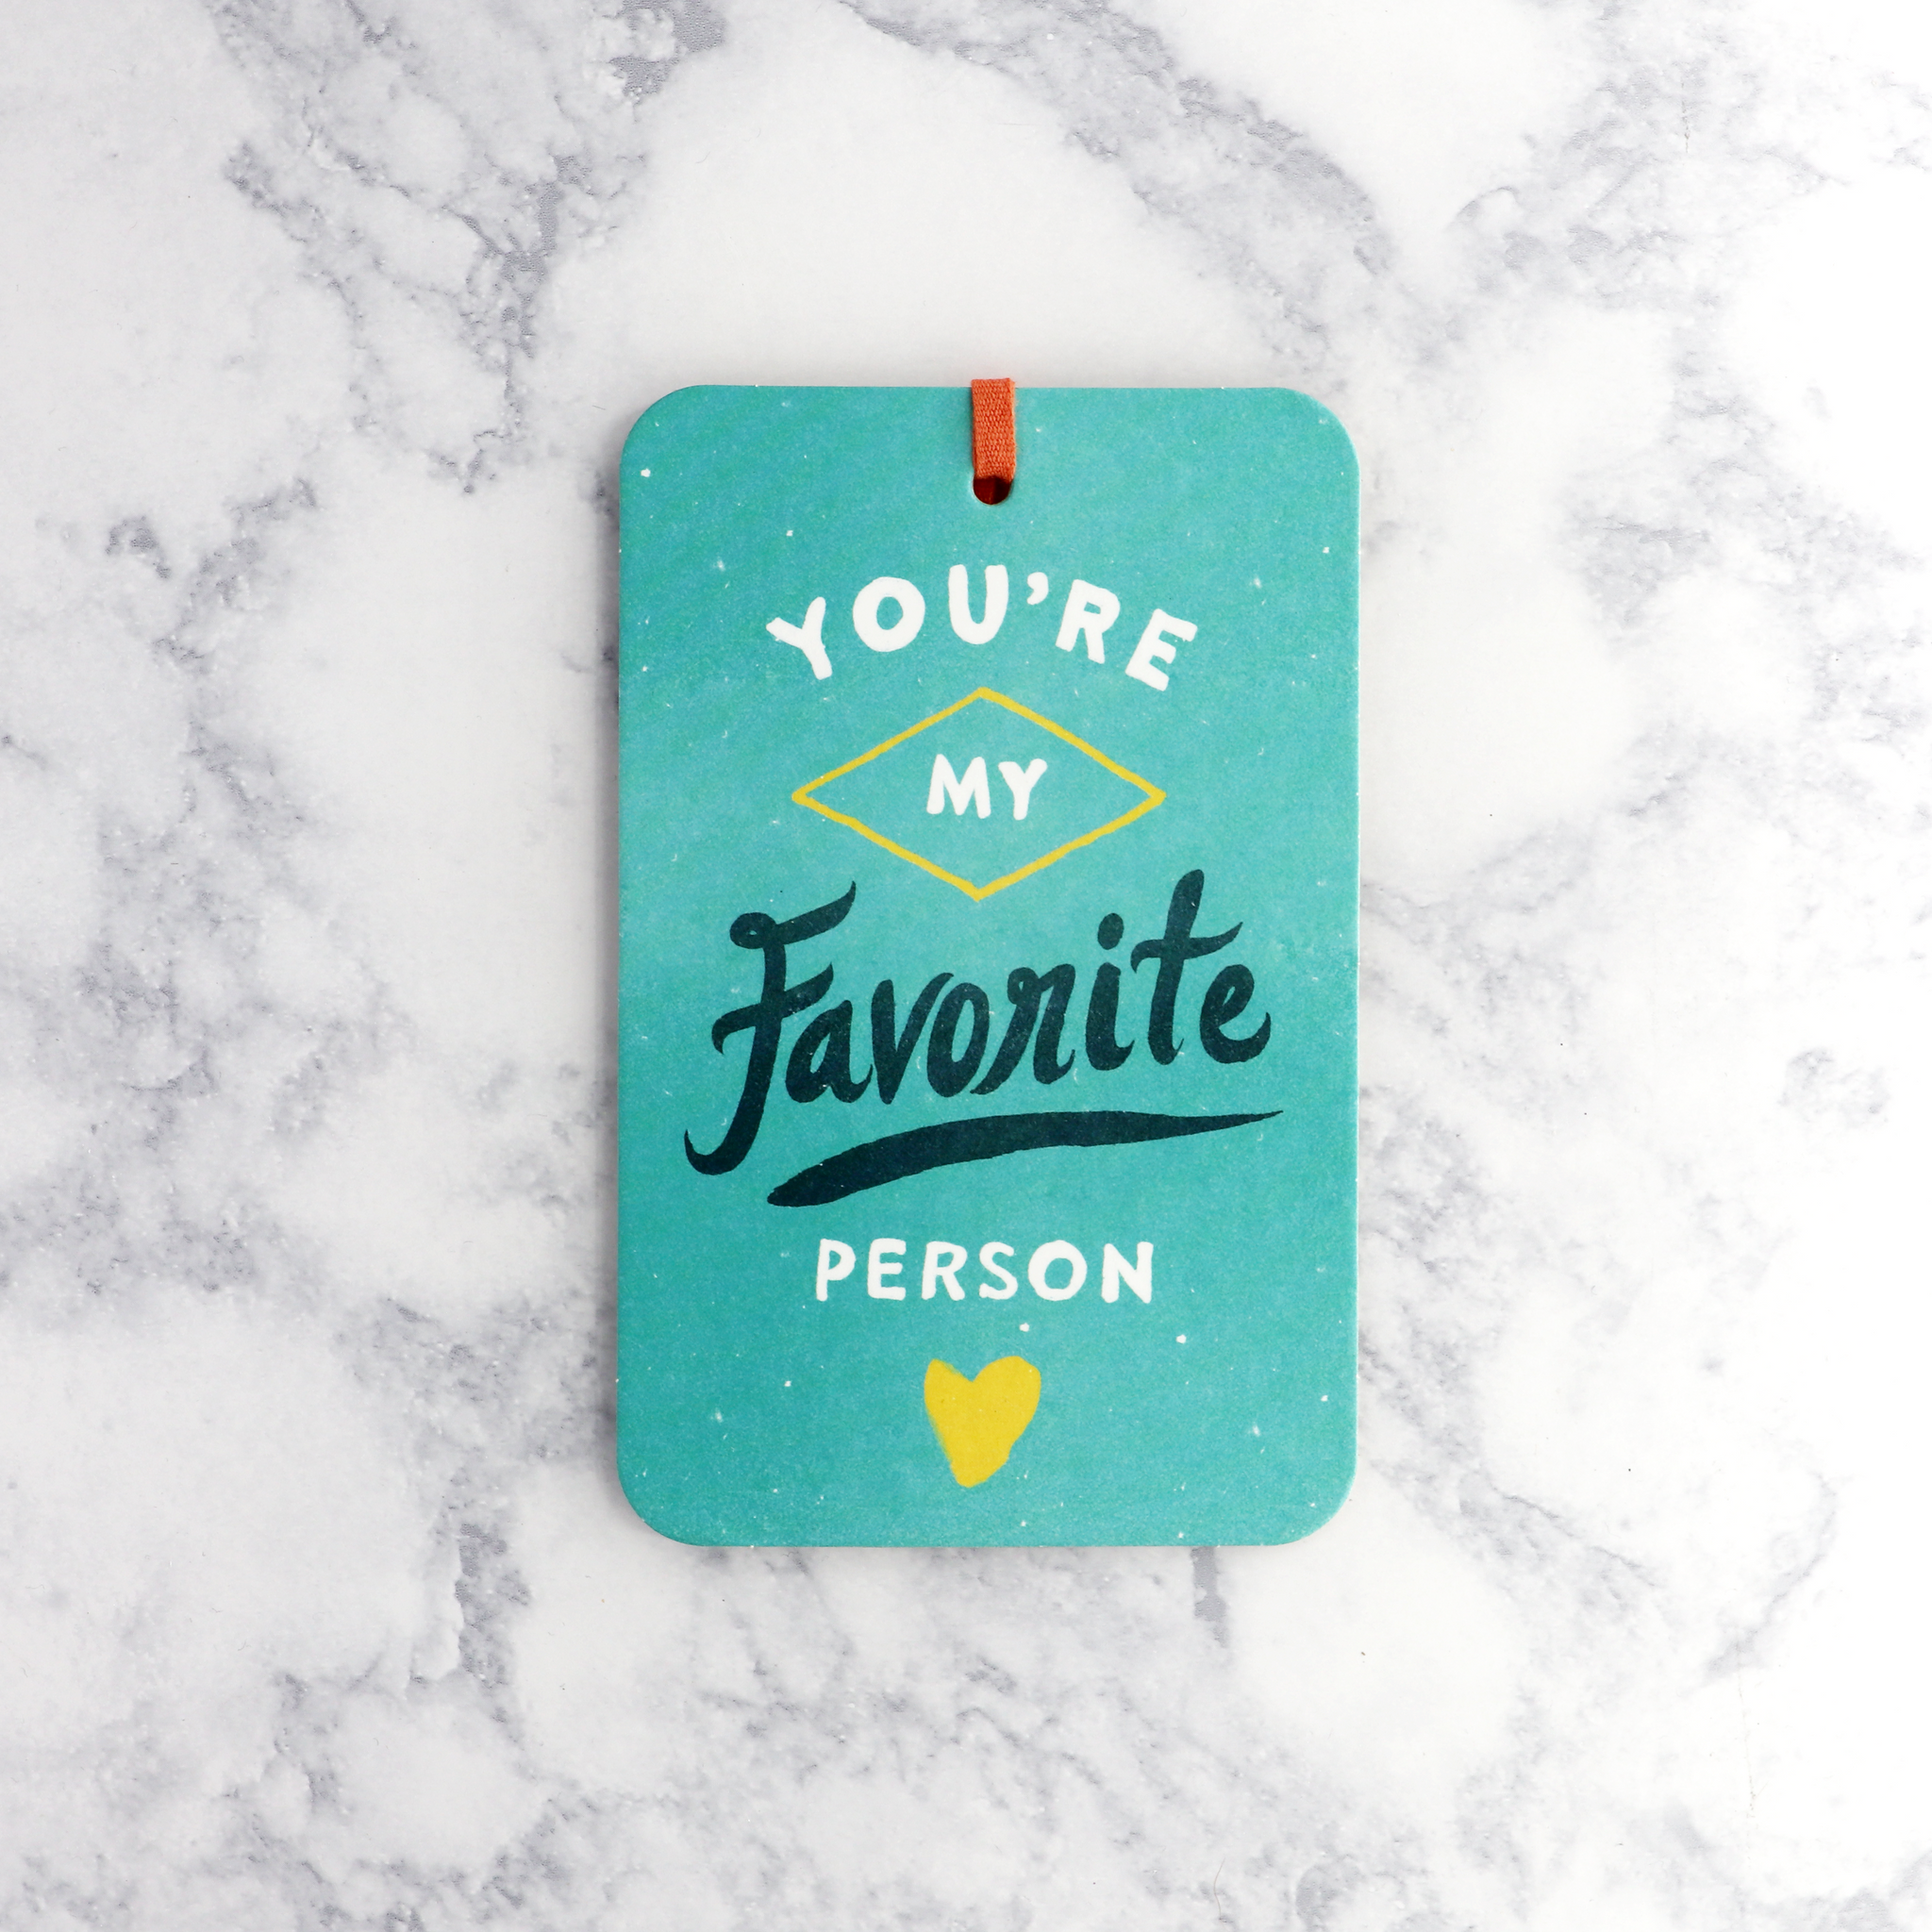 "You’re My Favorite Person" Gift Tag